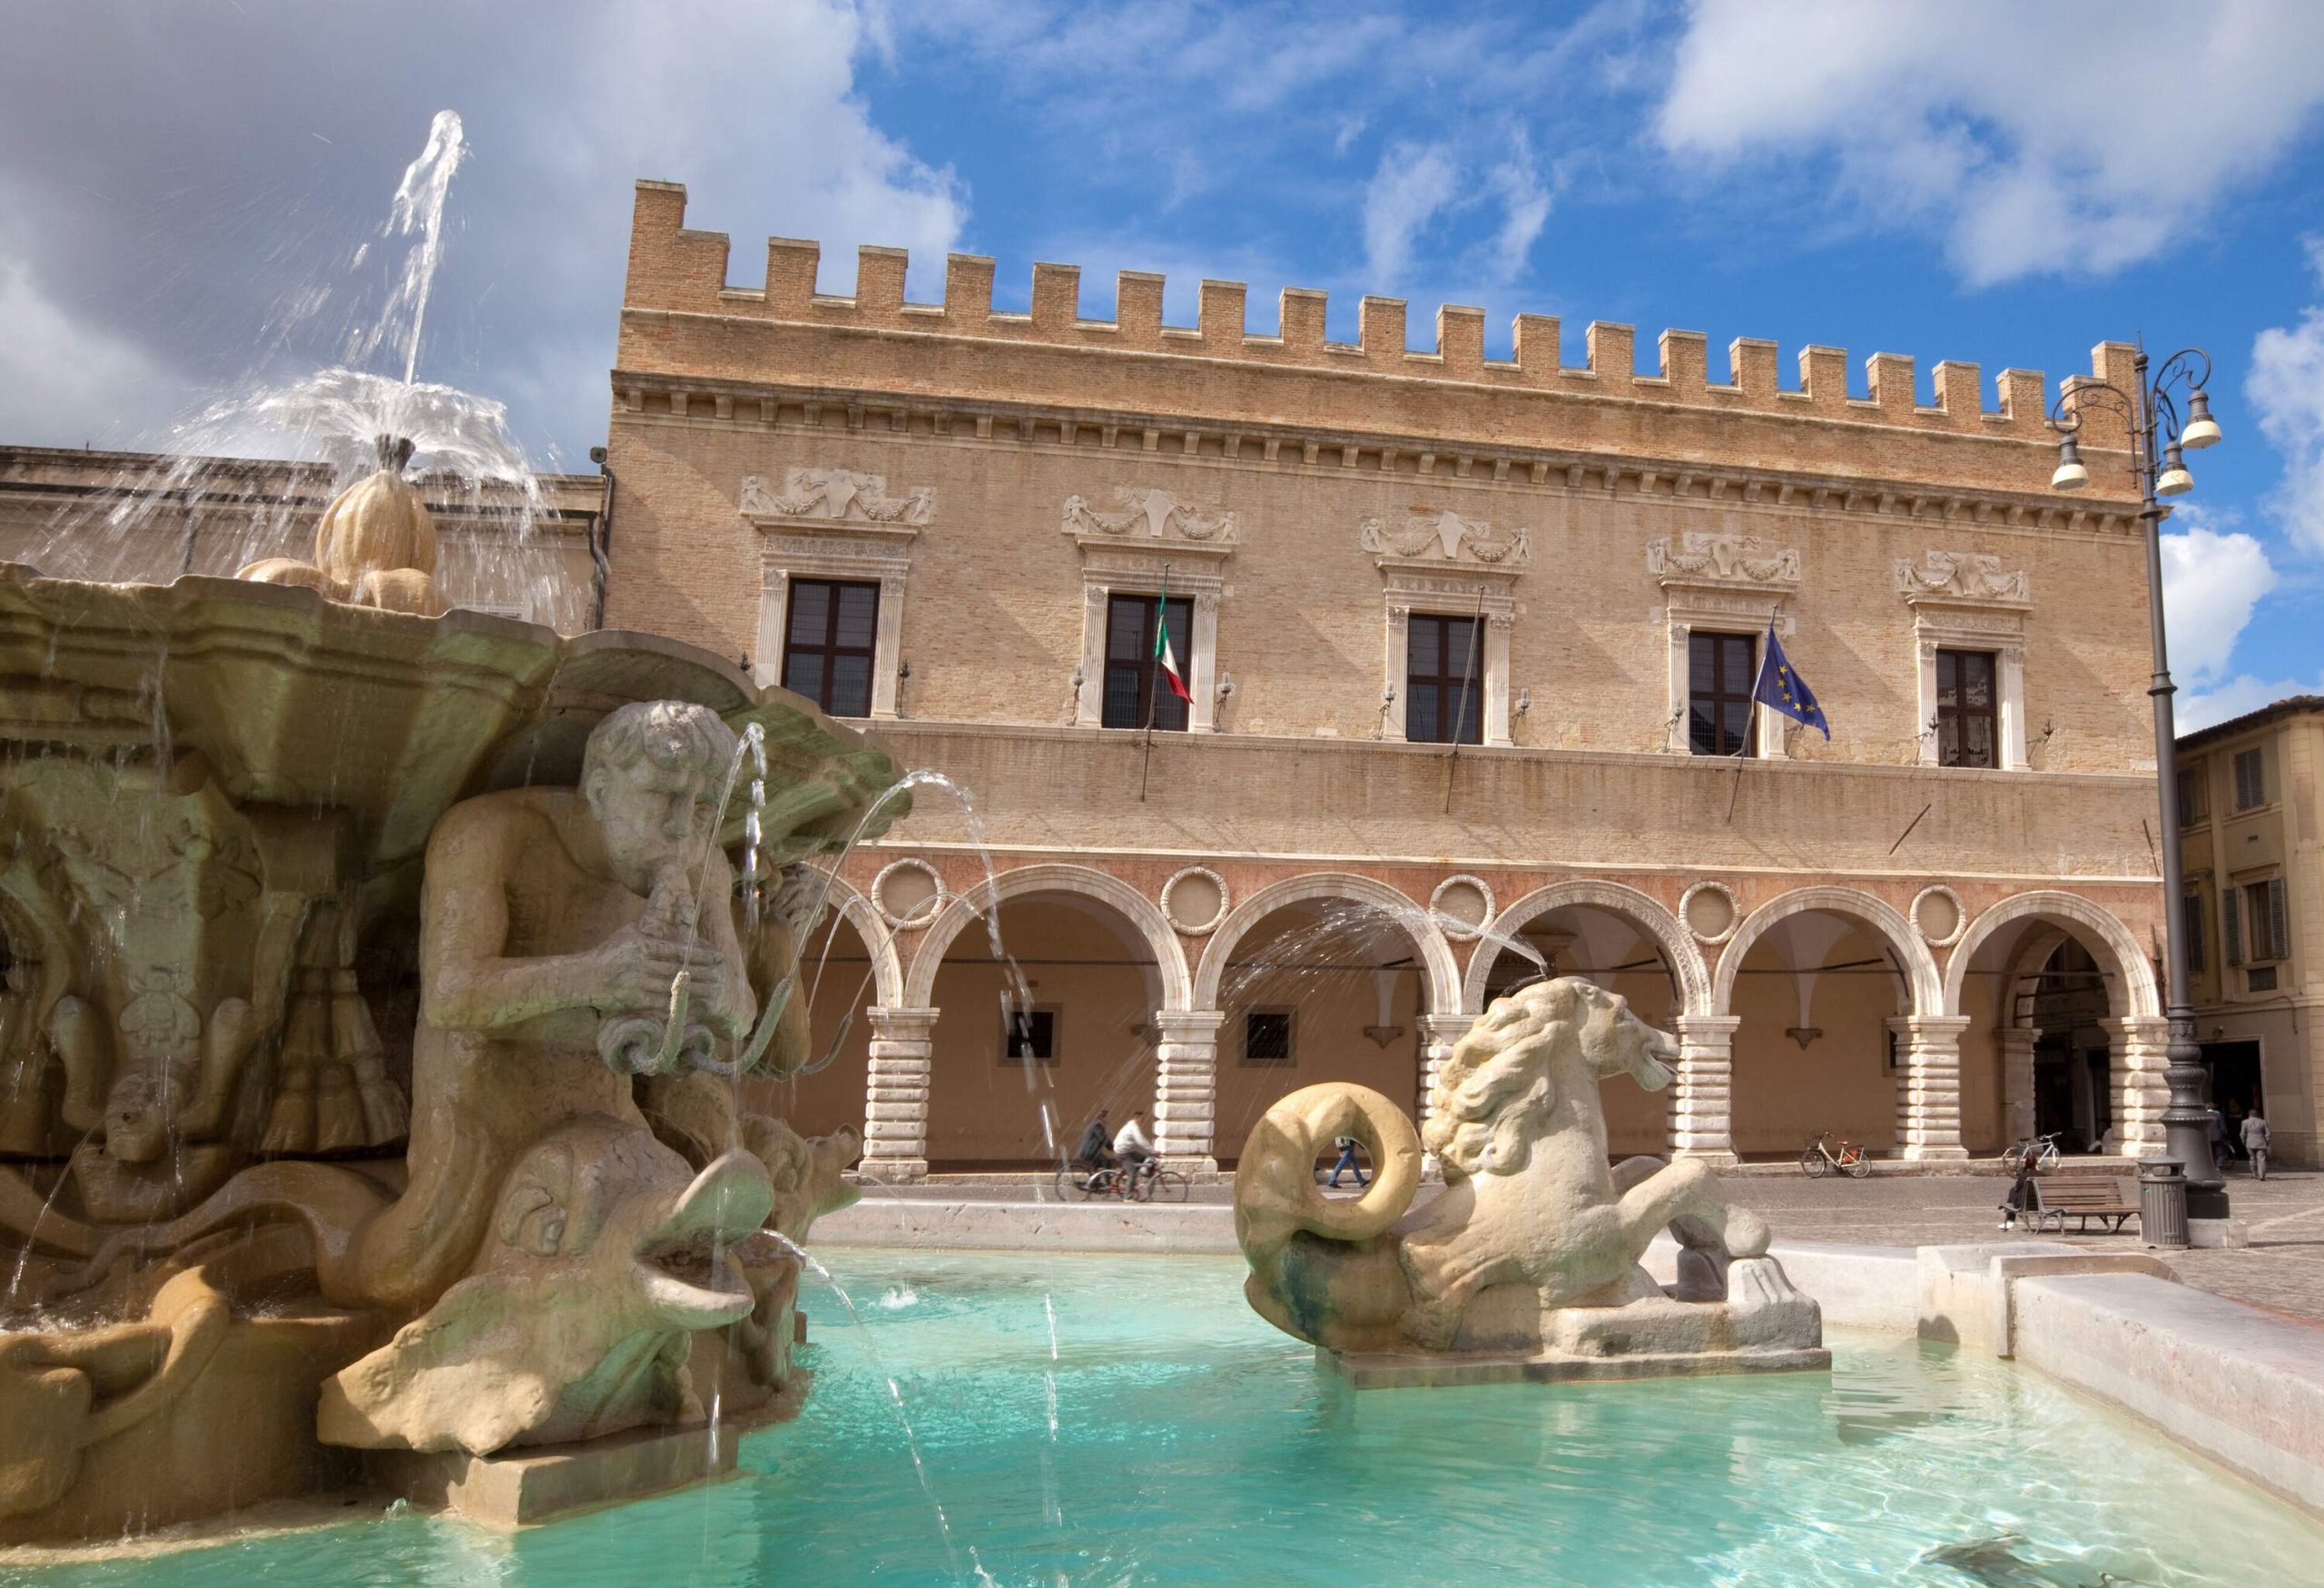 Fountain and Renaissance palace in Pesaro, Marches, Italy.